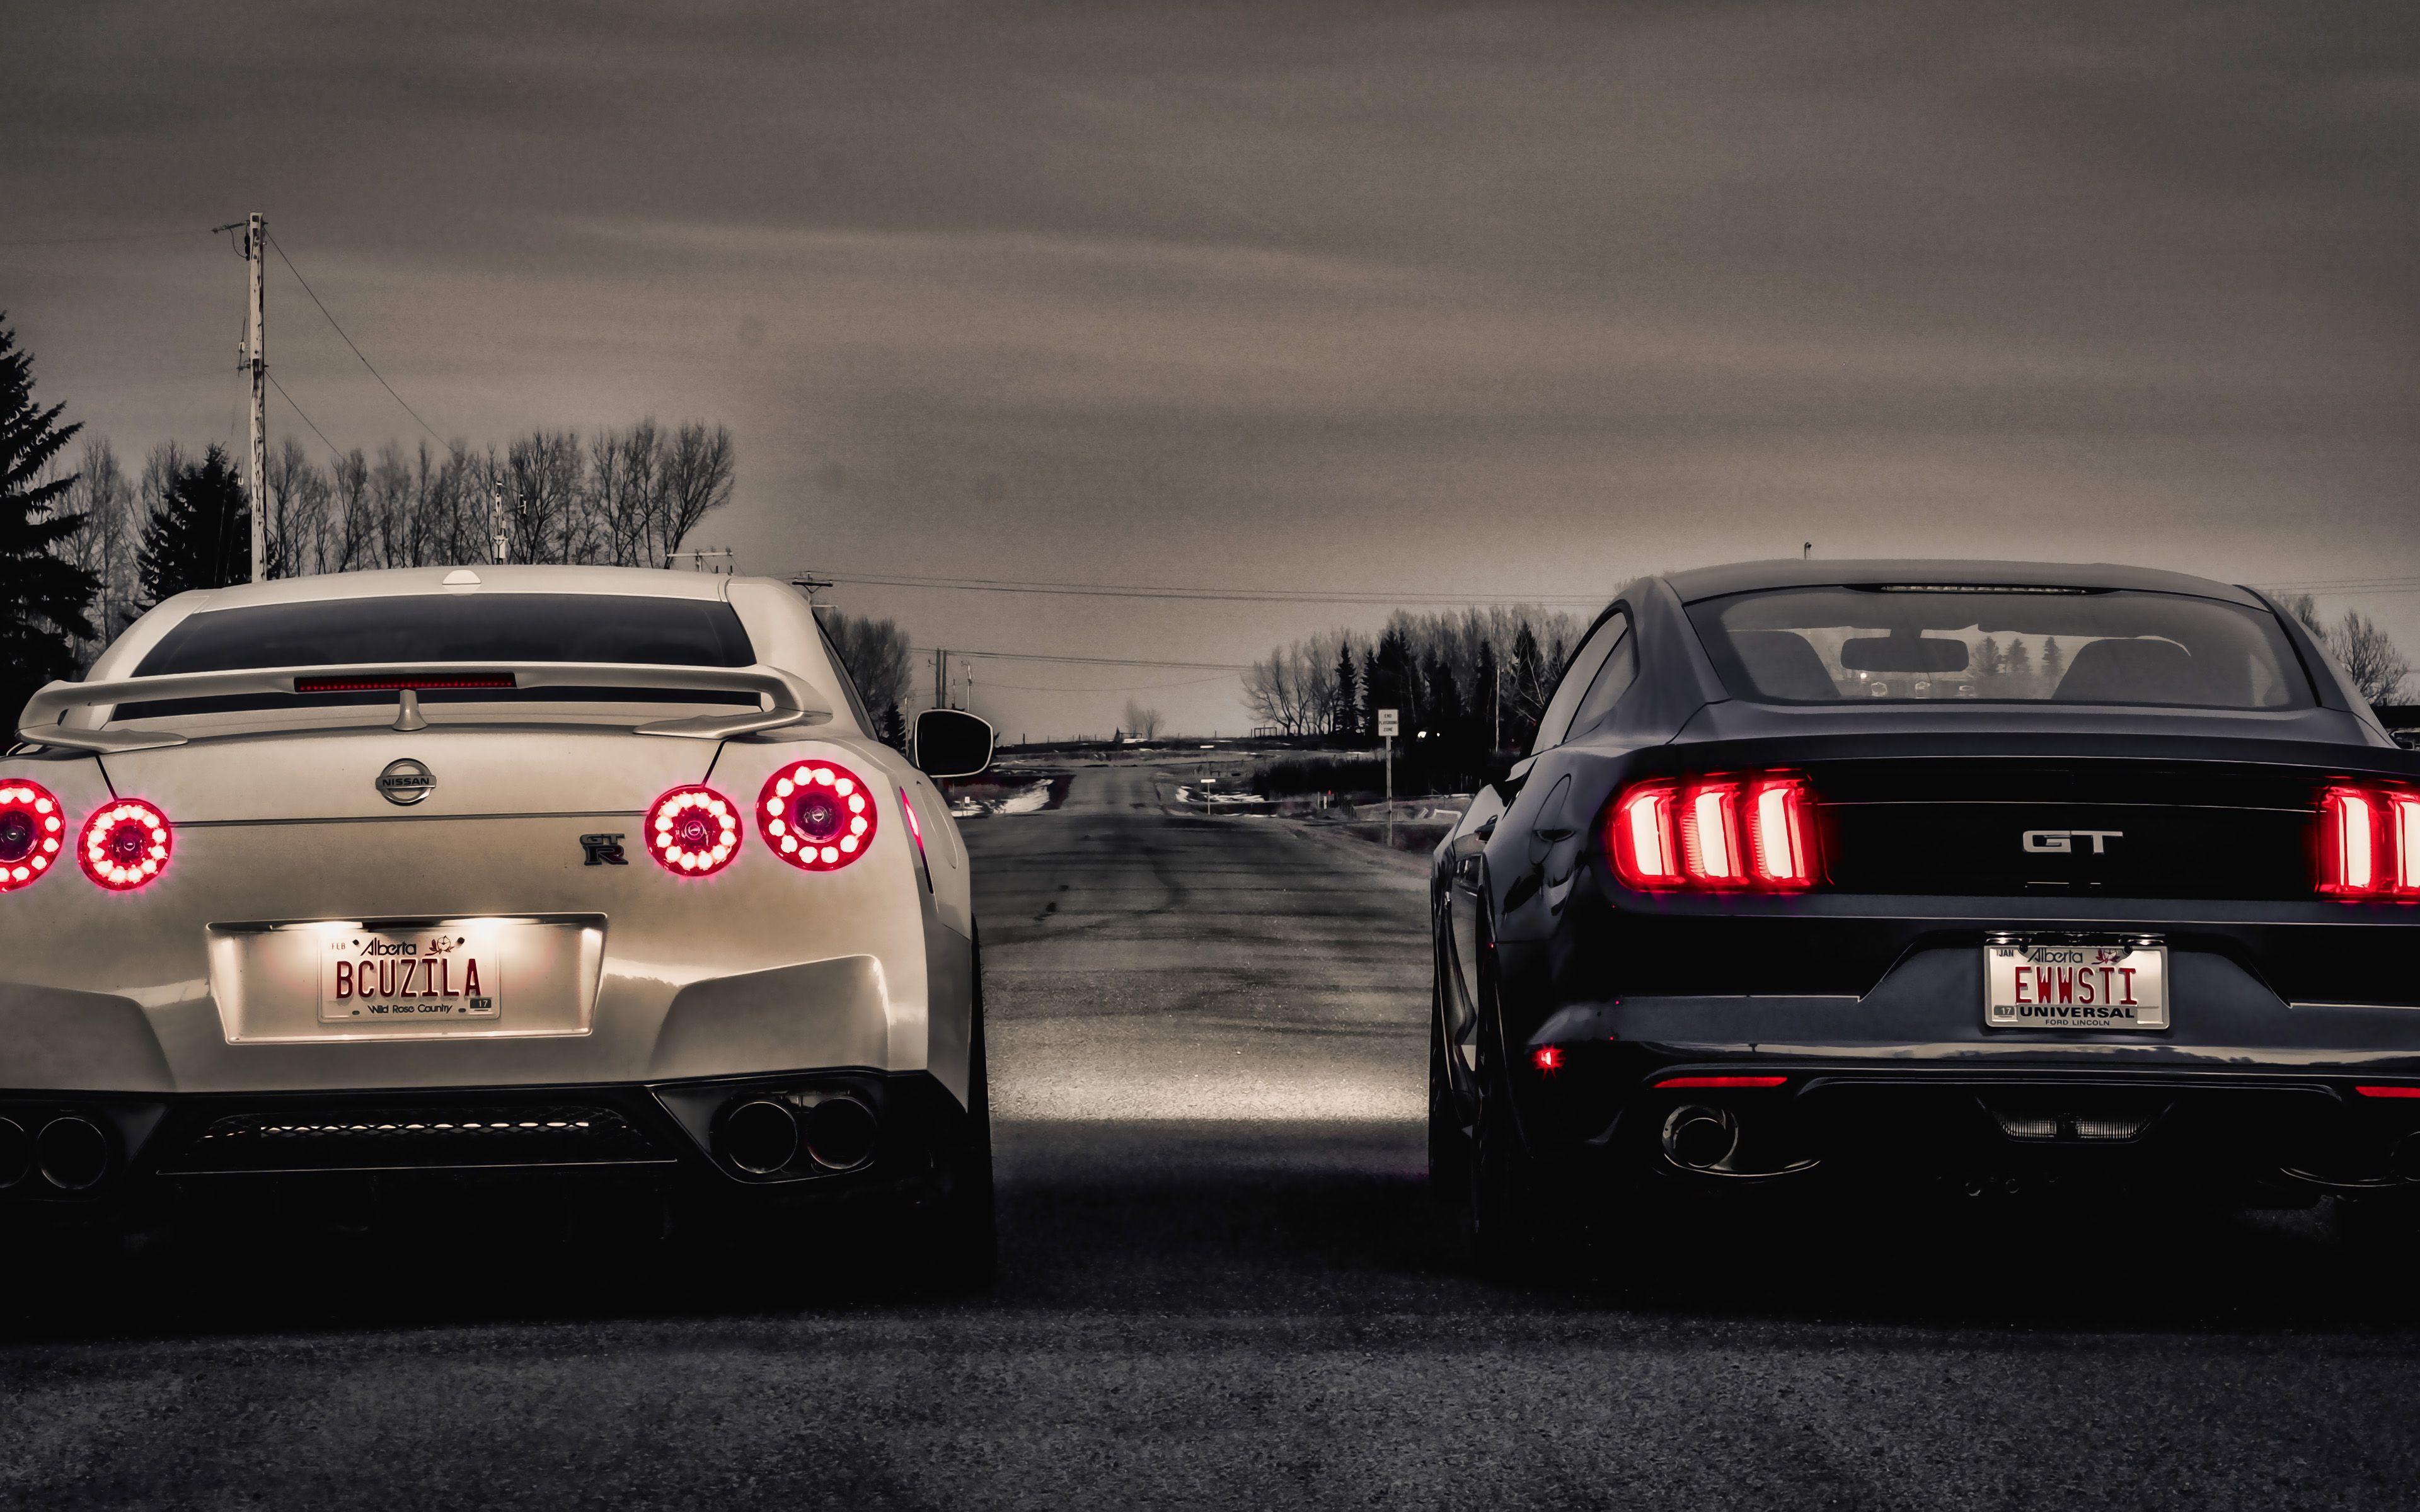 Download Wallpaper Nissan GT R Vs Ford Mustang, 4k, Street Racing, 2019 Cars, Supercars, Nissan GT R, R Ford Mustang, American Cars, Nissan Vs Ford For Desktop With Resolution 3840x2400. High Quality HD Picture